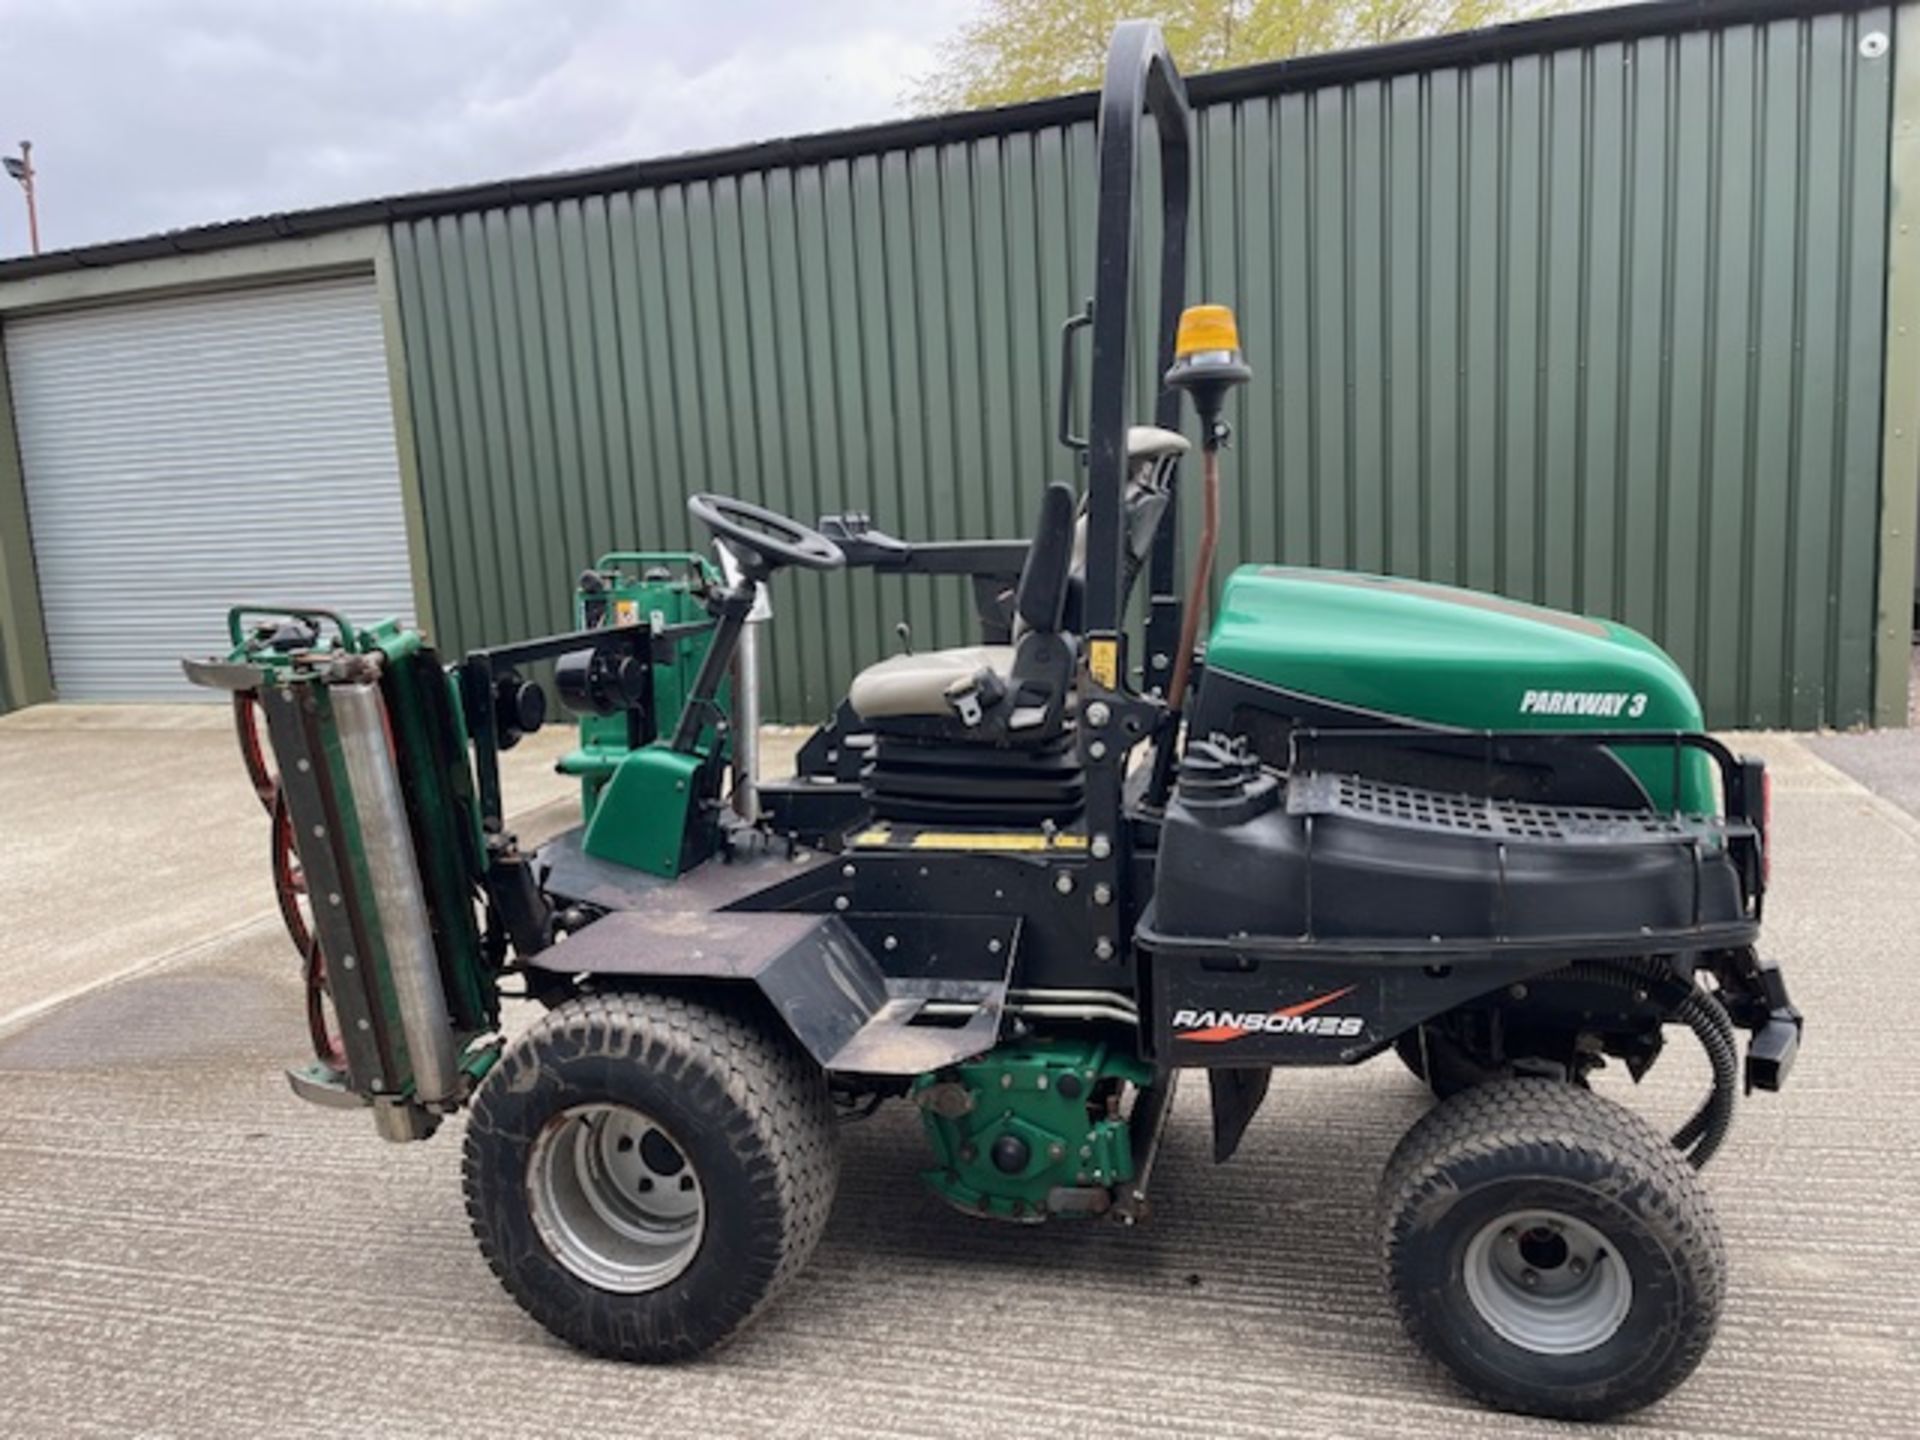 2017/2018 - RANSOMES PARKWAY 3 RIDE ON MOWER SERVICED - Image 10 of 12